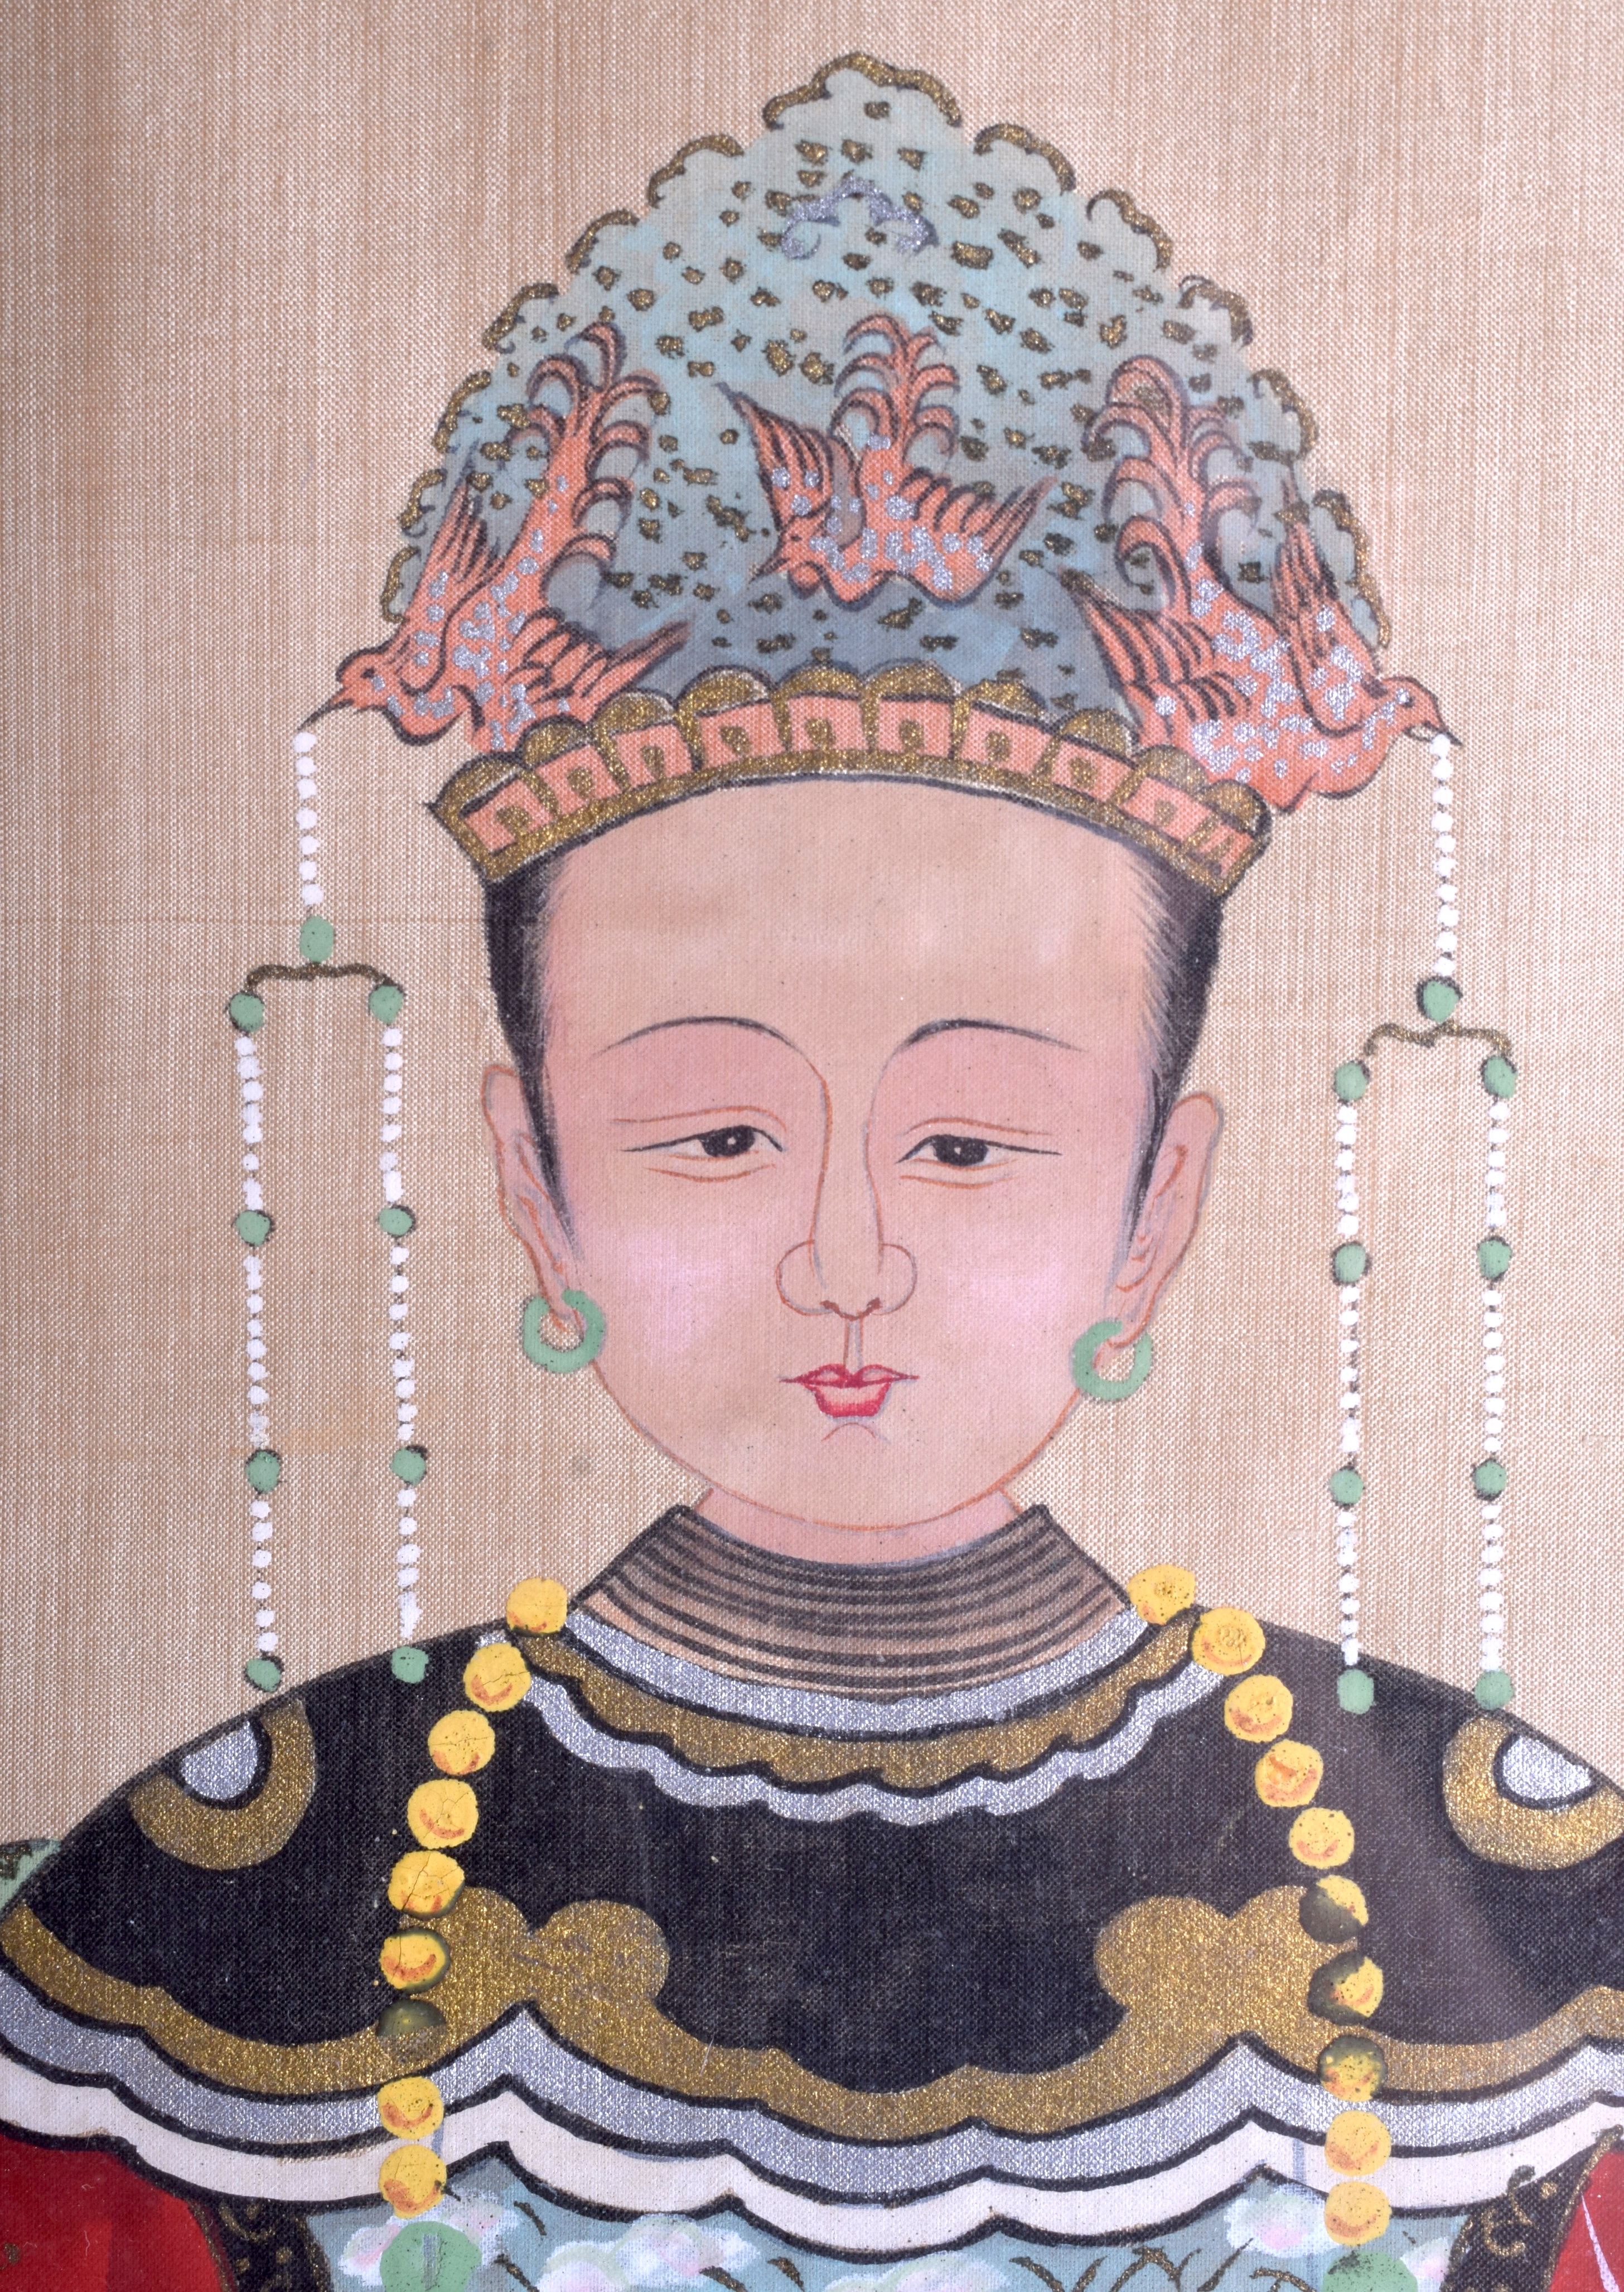 A CHINESE FRAMED ANCESTRAL WATERCOLOUR. Image 68 cm x 40 cm. - Image 3 of 7